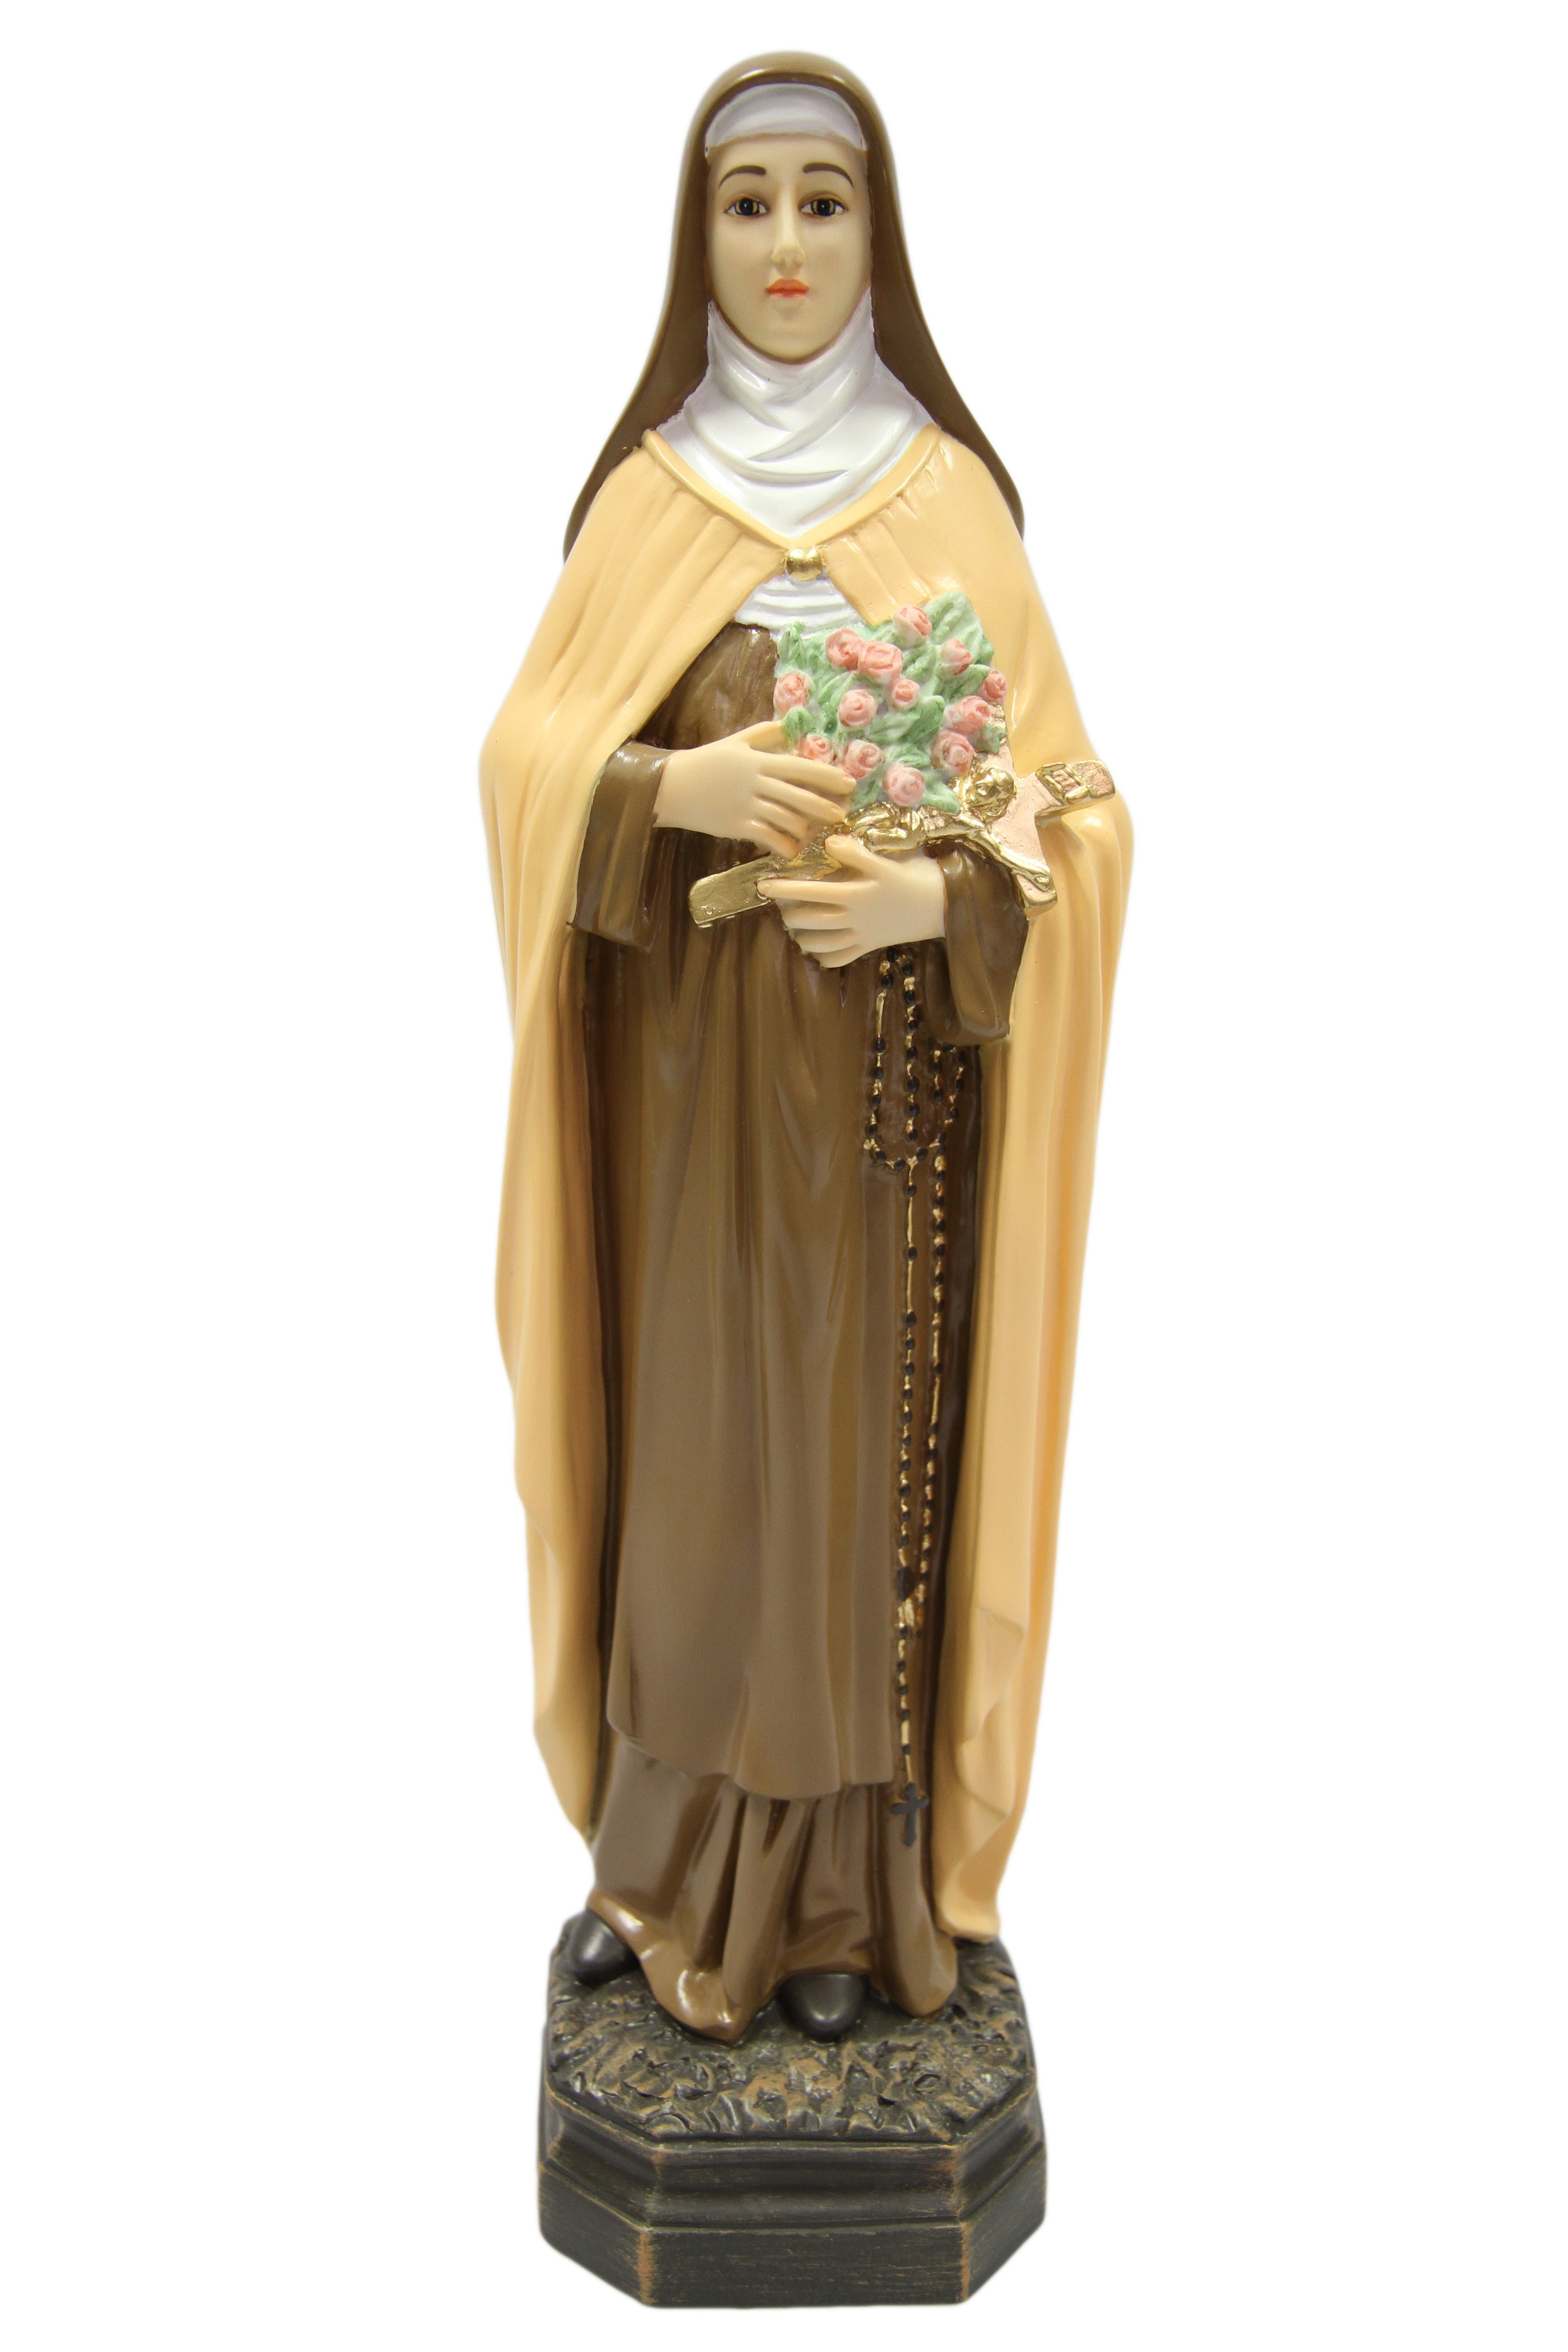 16 Inch Saint Therese The Little Flower Catholic Statue Figurine Vittoria Collection